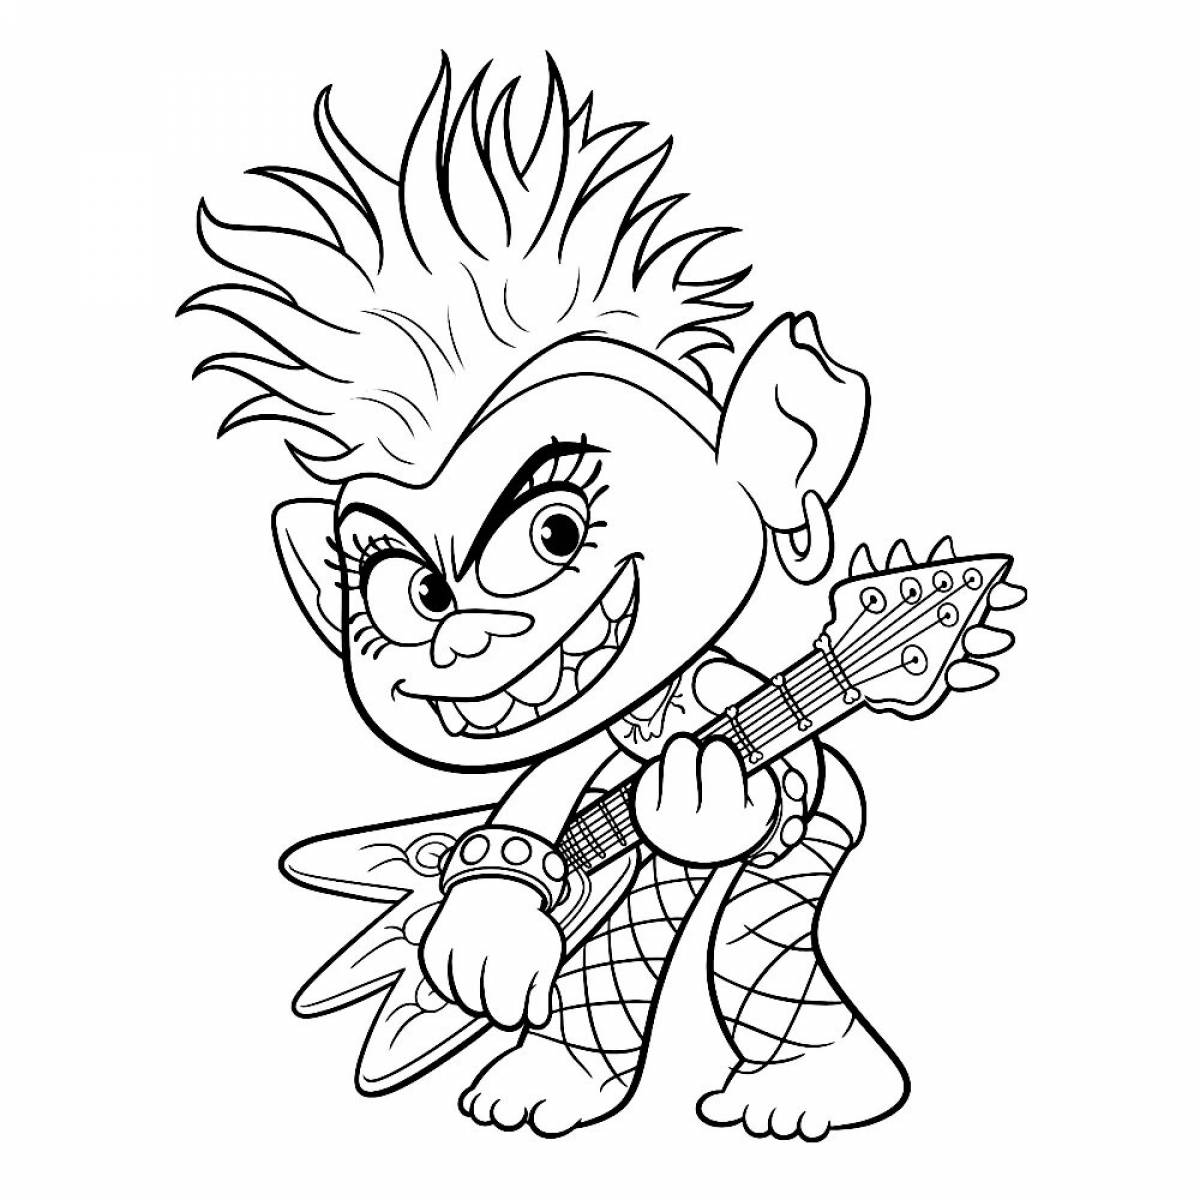 Amazing coloring pages trolls rocks